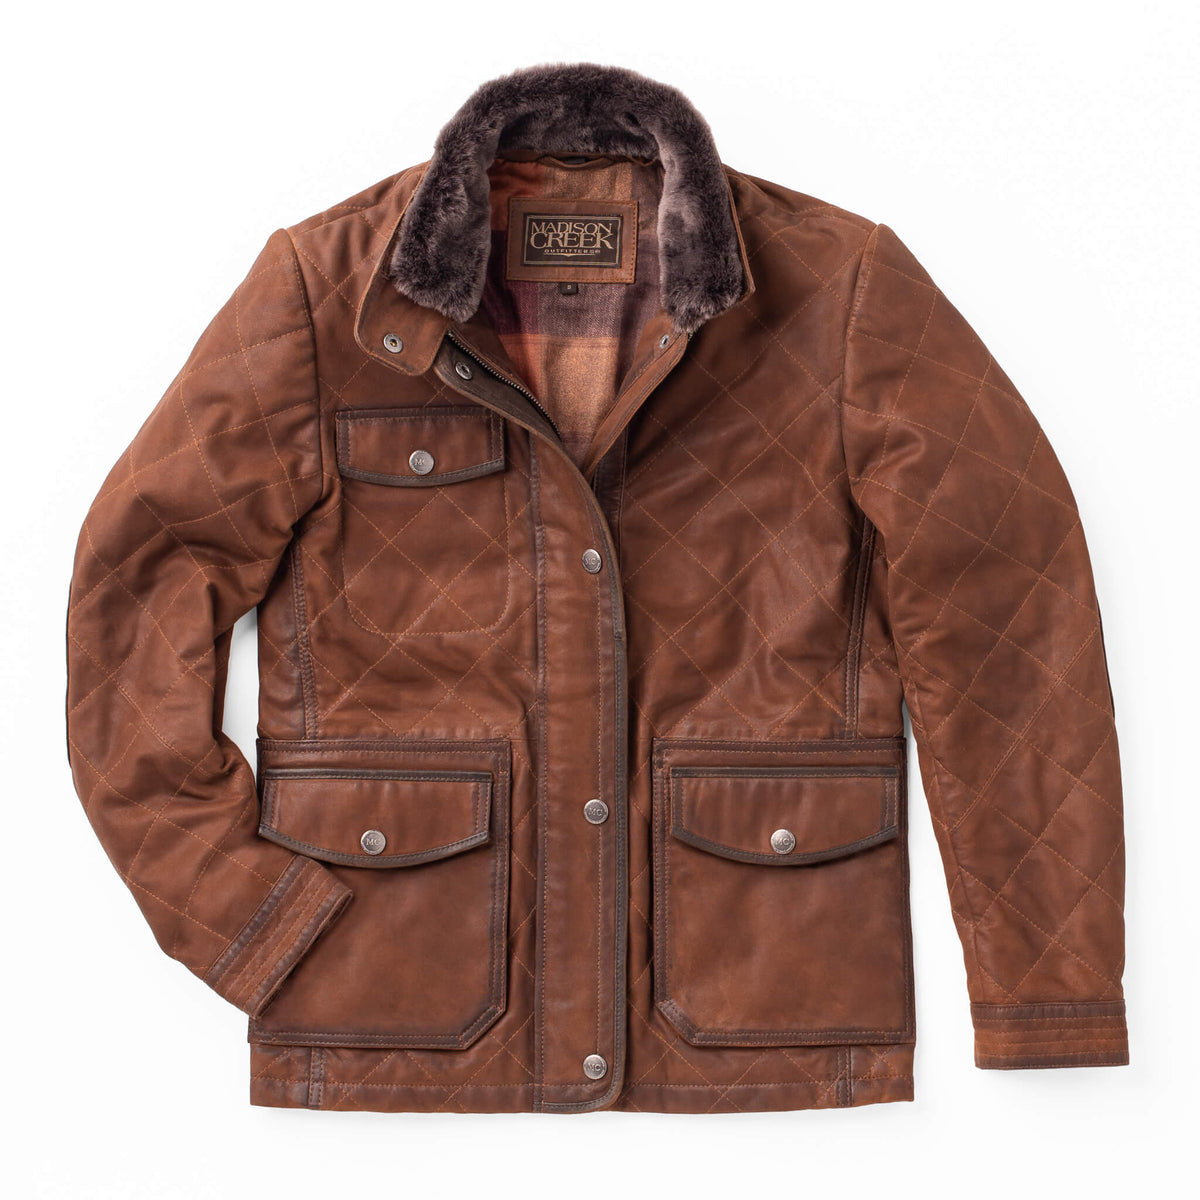 Wasatch Waxed Suede Leather Jacket